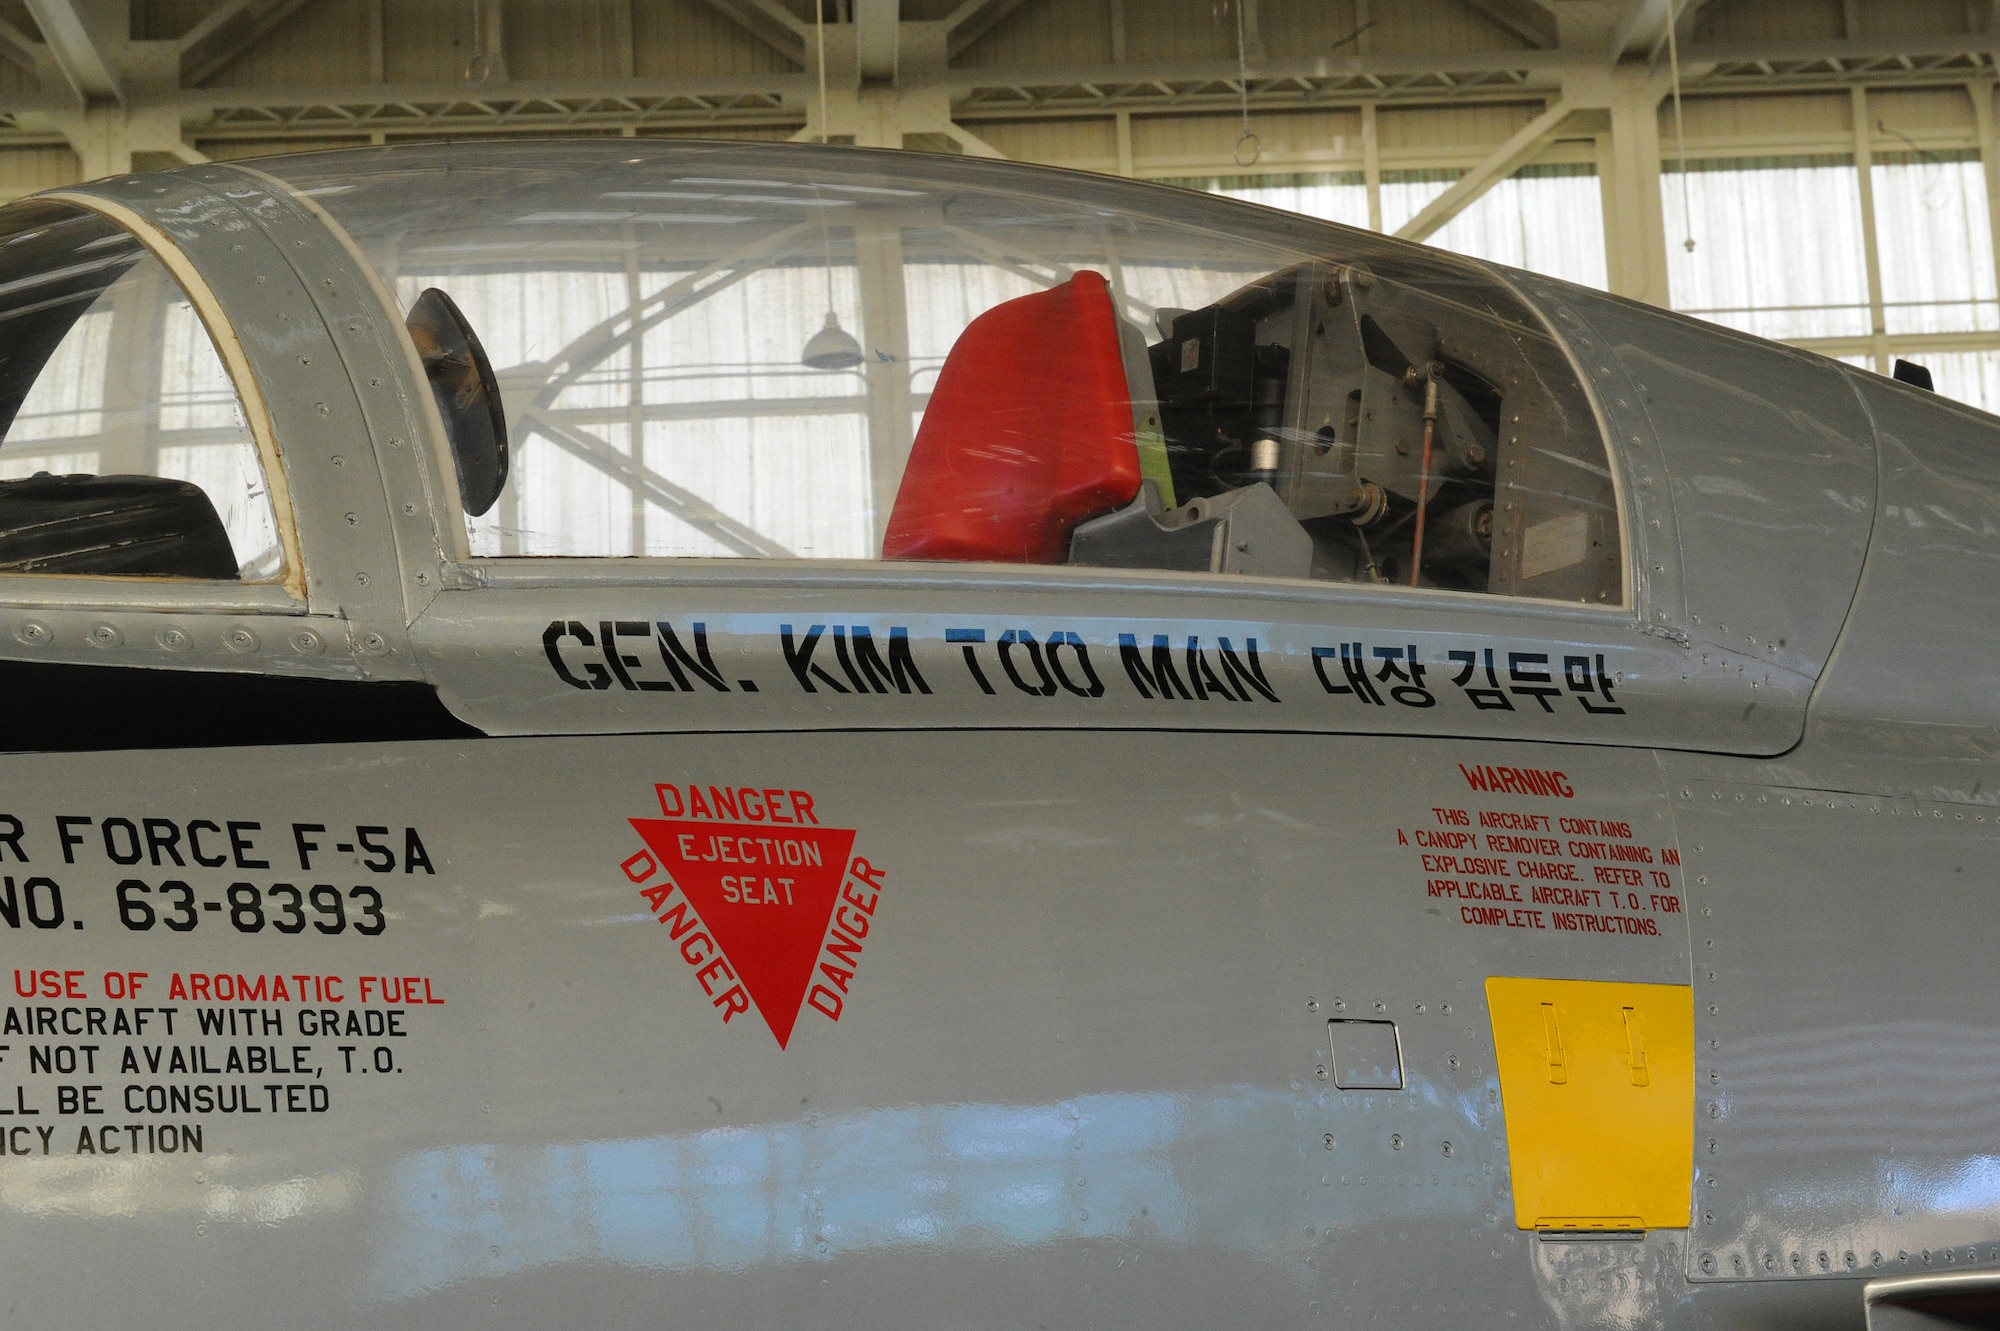 A Republic of Korea Air Force F-5A Freedom Fighter dedicated to Gen. Kim Too Man, a legendary figure in the ROKAF, sits on displays at the Pacific Aviation Museum, Ford Island, Hawaii, Nov.12, 2012. Today the aircraft are used as an adversary fighter in the “Top Gun” and “Red Flag” combats schools. (U.S. Air Force photo/Tech Sgt. Jerome S. Tayborn/Released)